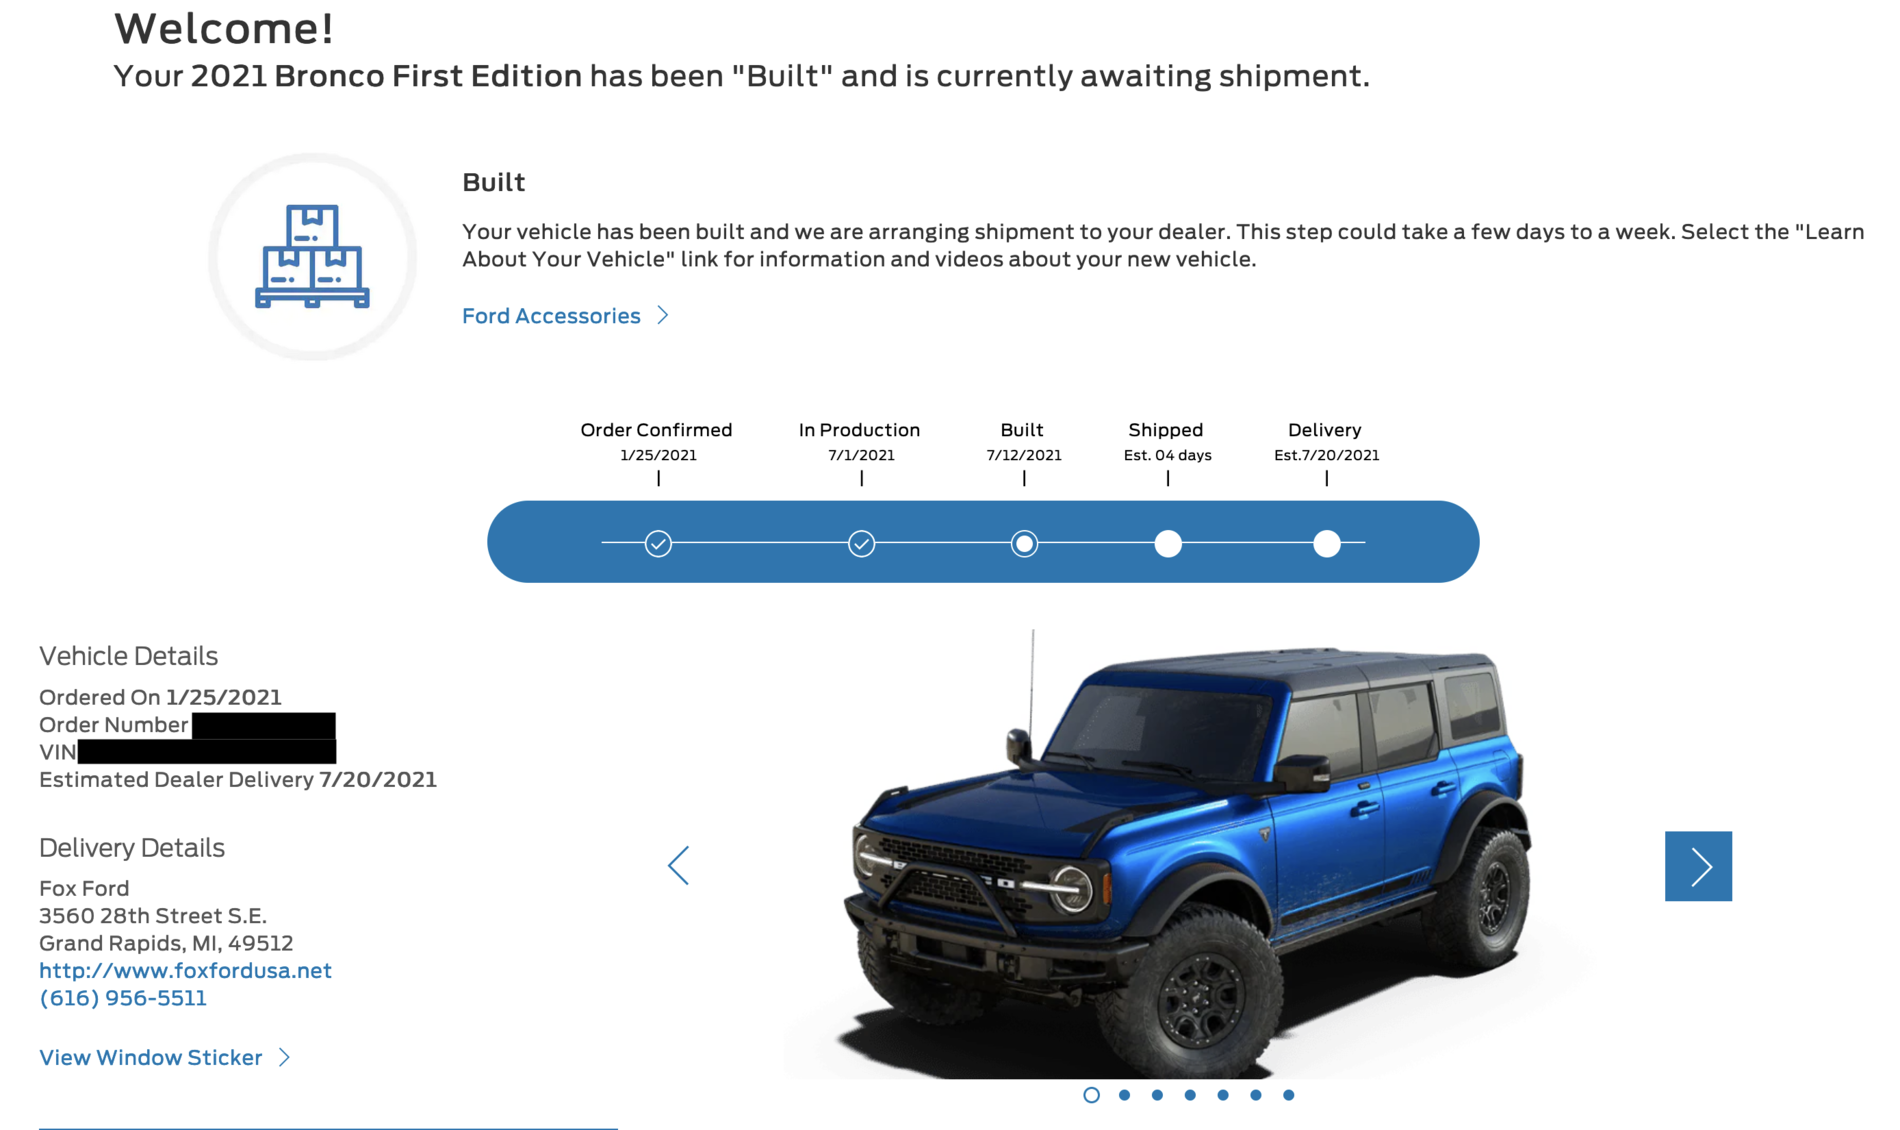 Ford Bronco 6/30 blend dates Screen Shot 2021-07-20 at 10.04.46 PM